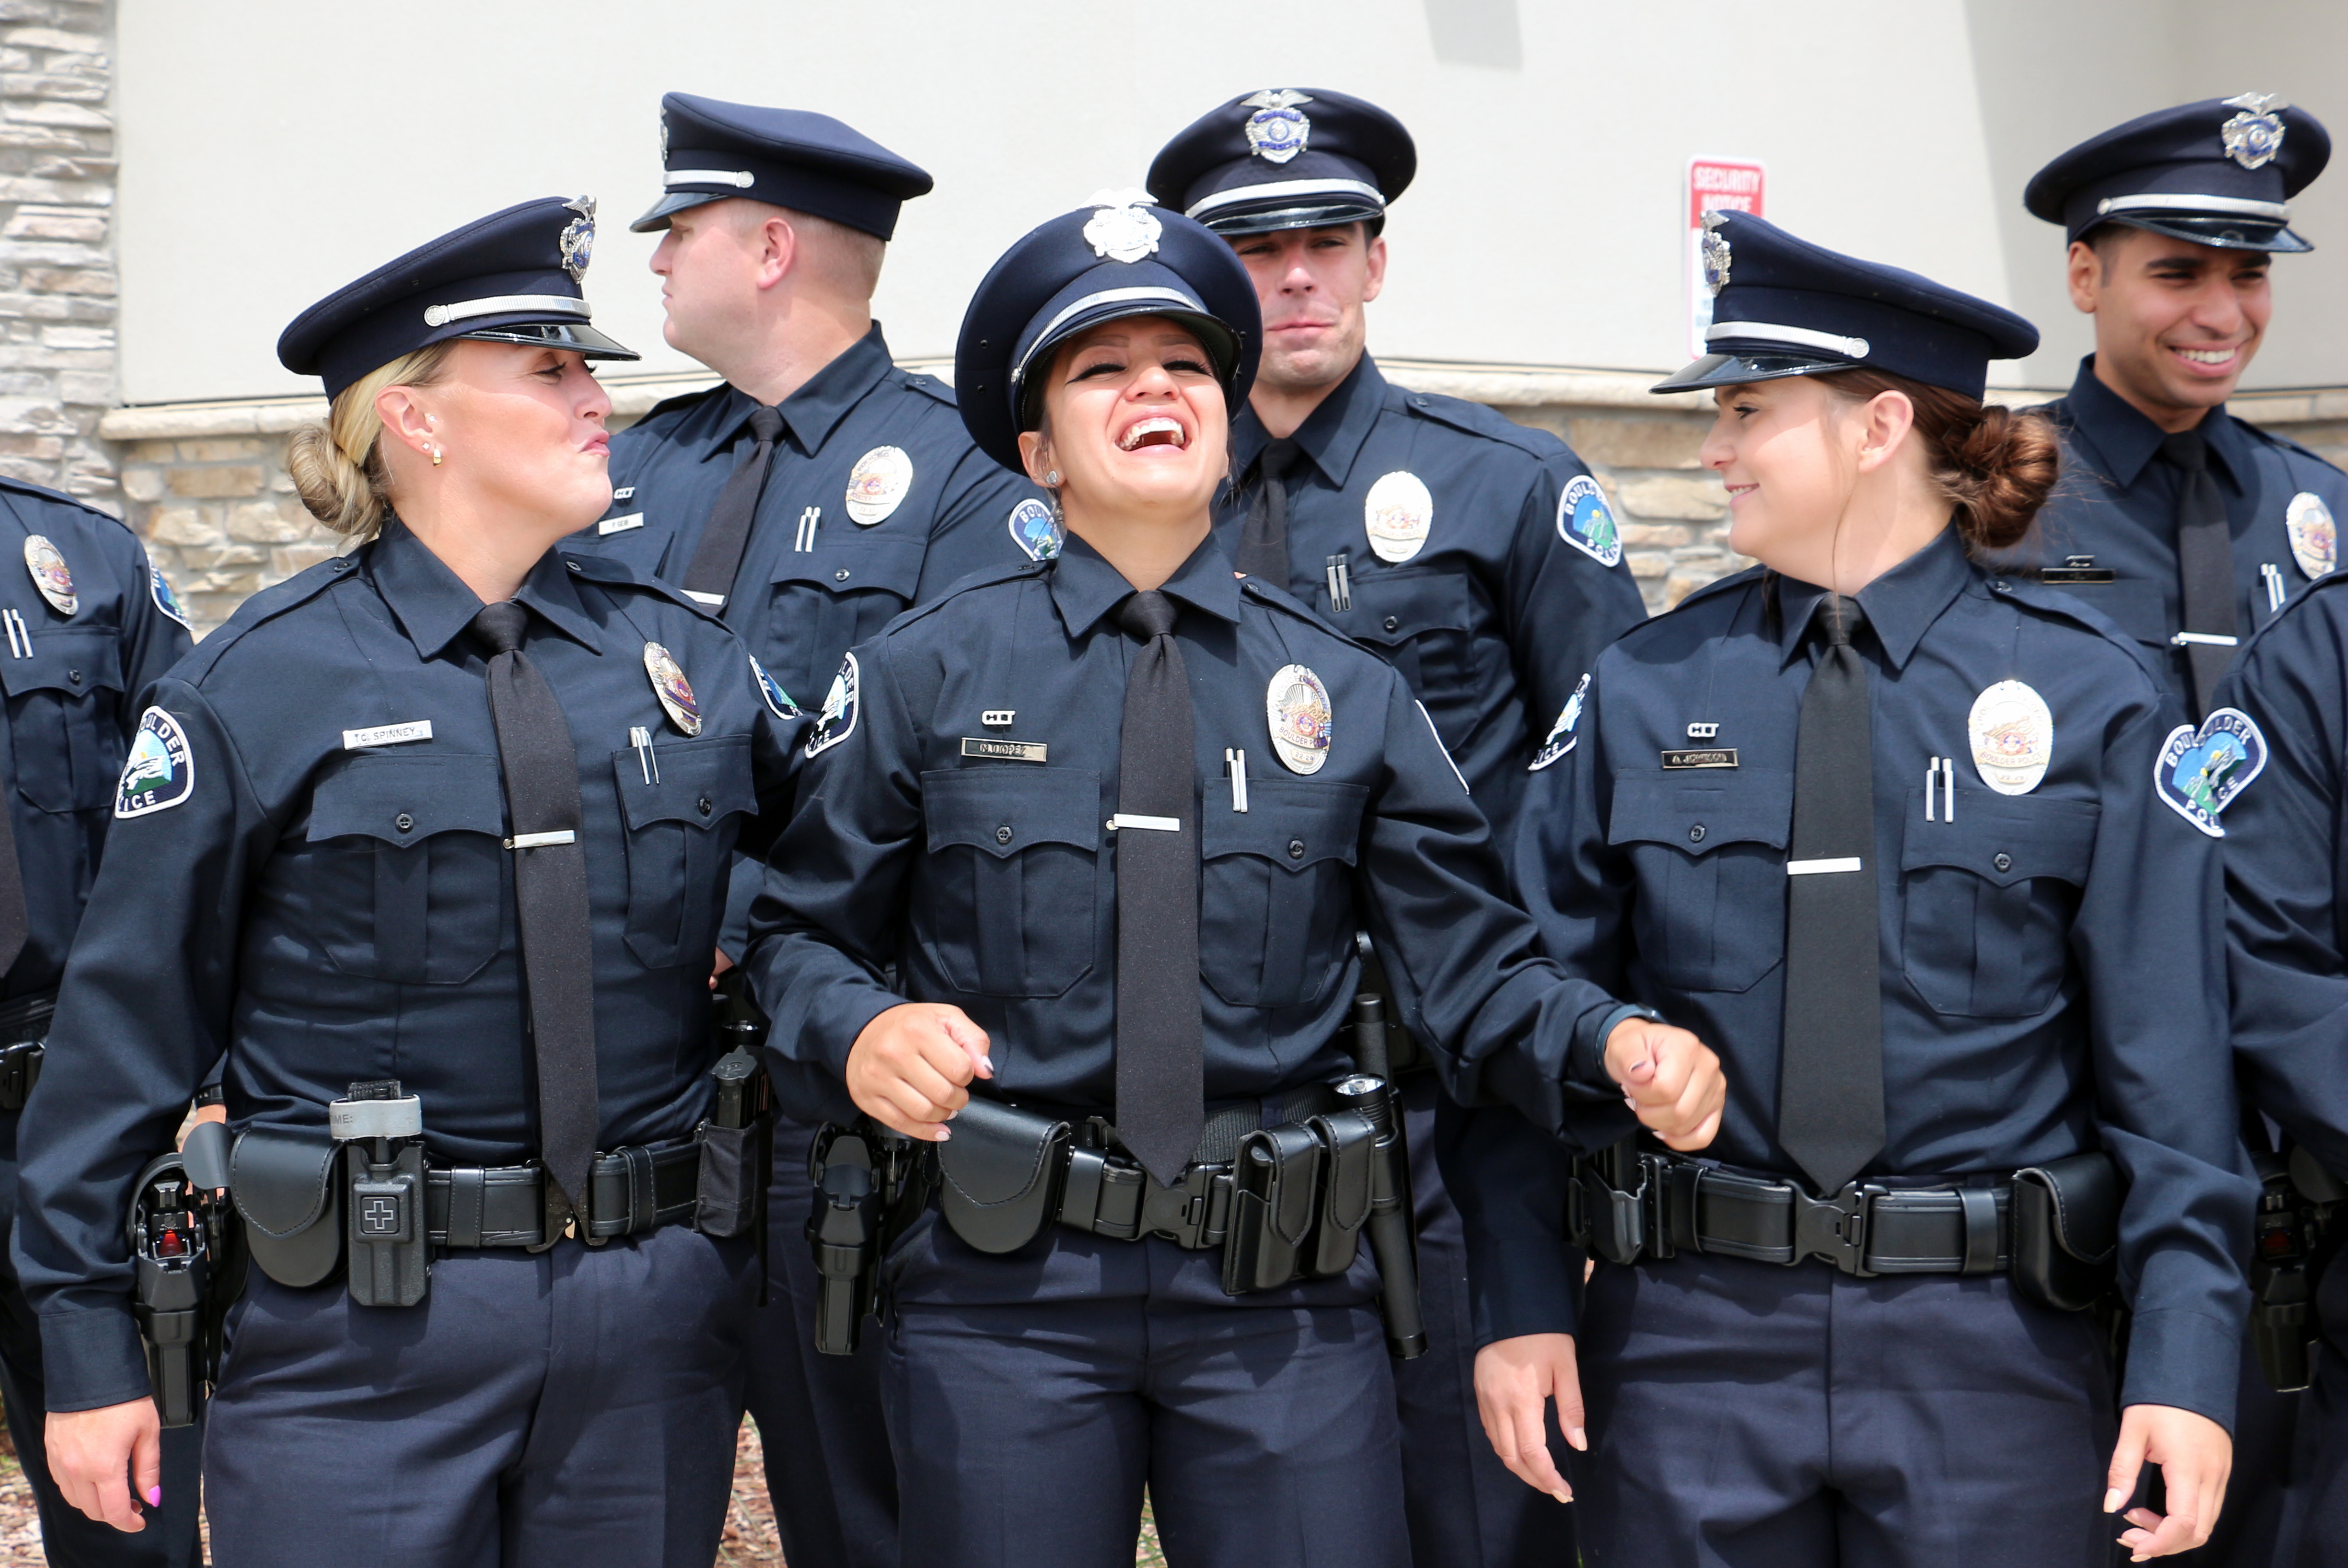 A group of Boulder Police Officers posing for a photo laughing. 